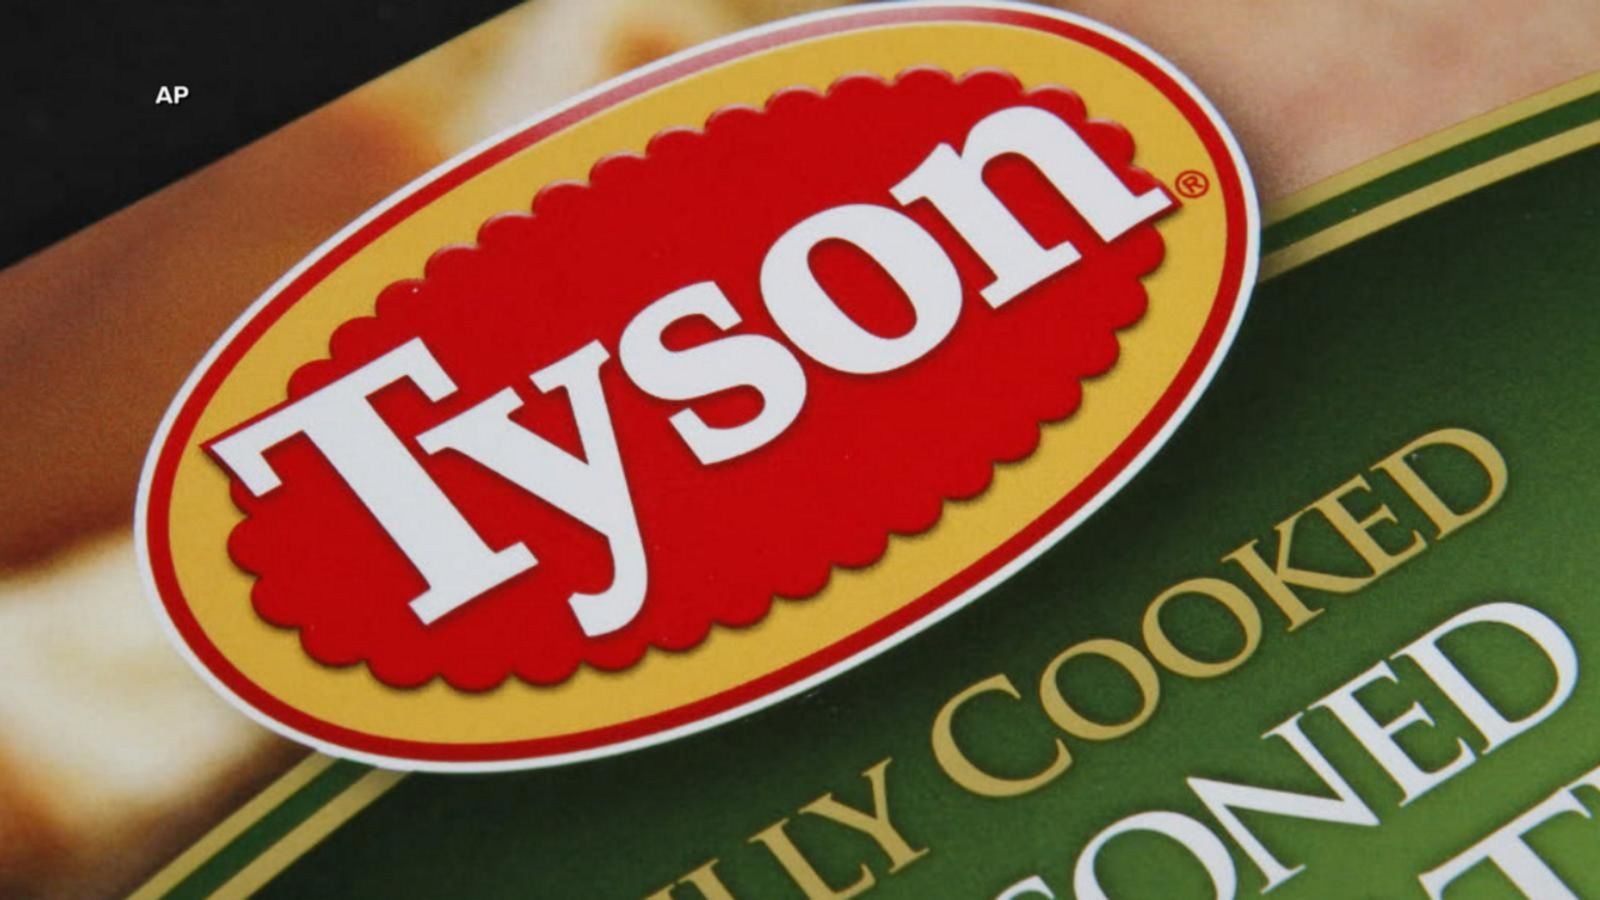 More Tyson chicken processing plants are closing Good Morning America